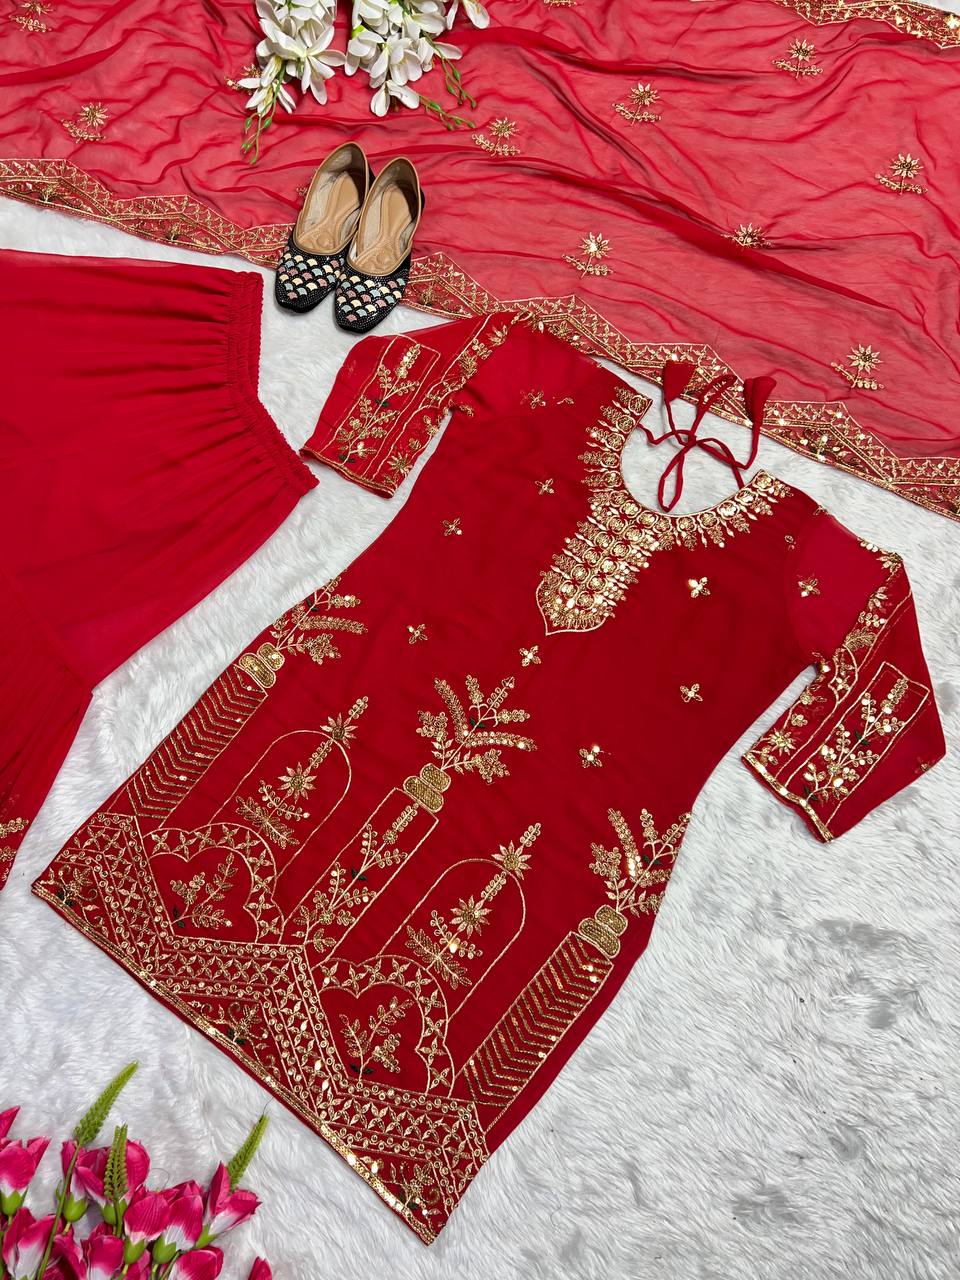 Marvelous Embroidery Work Red Color Sharara Suit